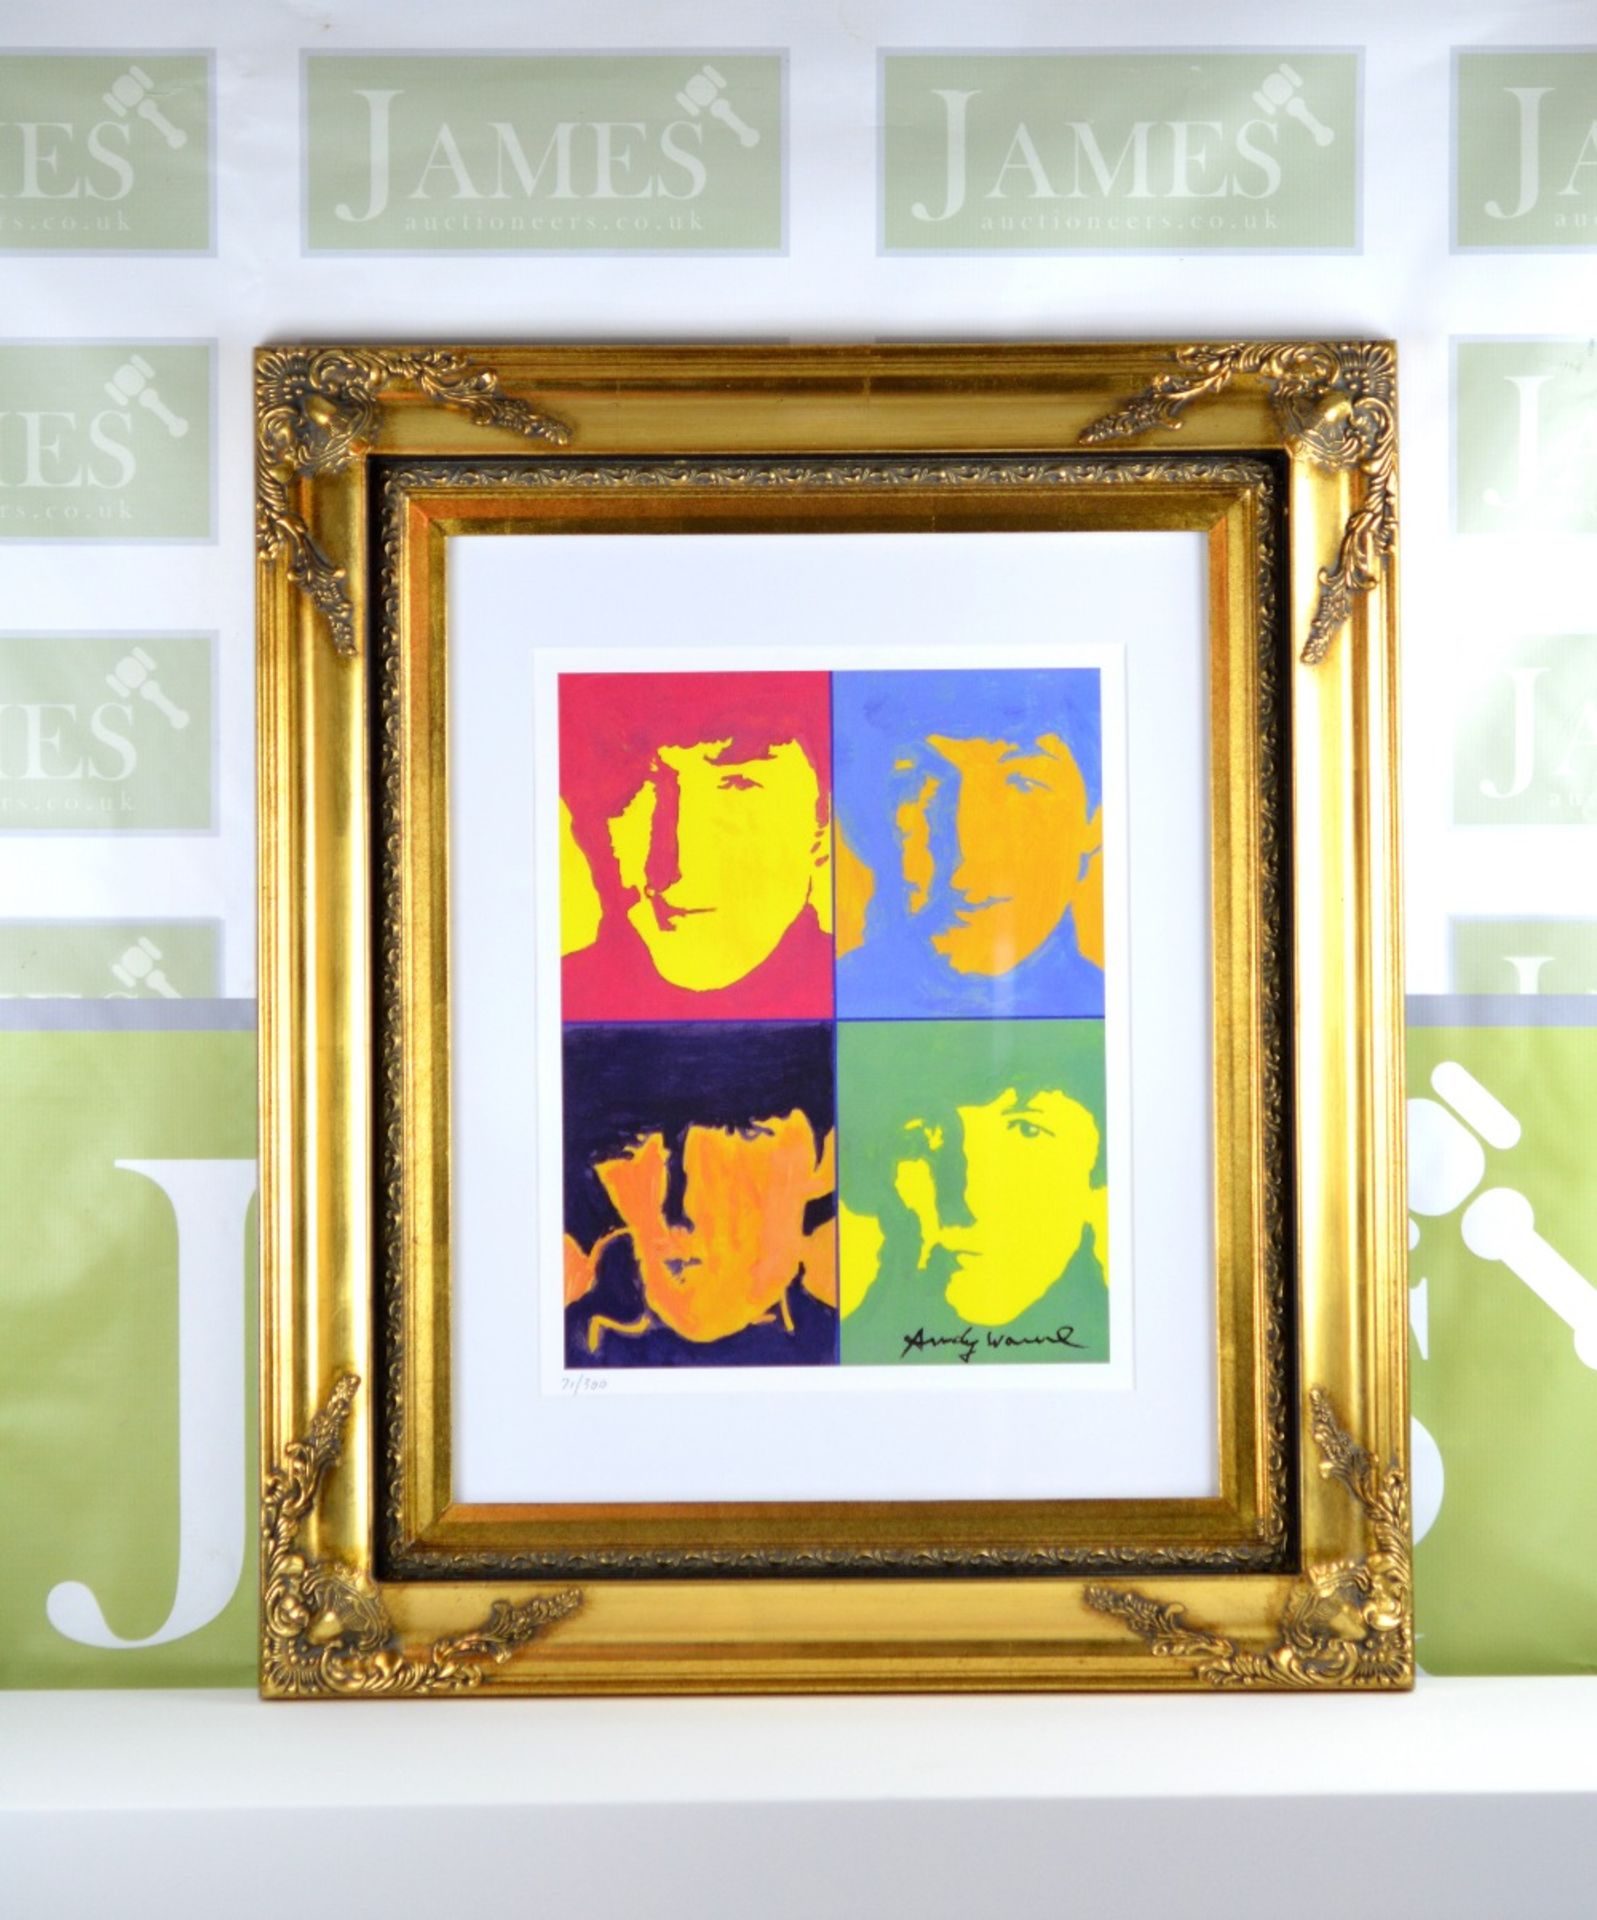 Andy Warhol Signed & Hand-Numberd Limited Edition "The Beatles" Lithograph Print 173/300 - Image 2 of 5